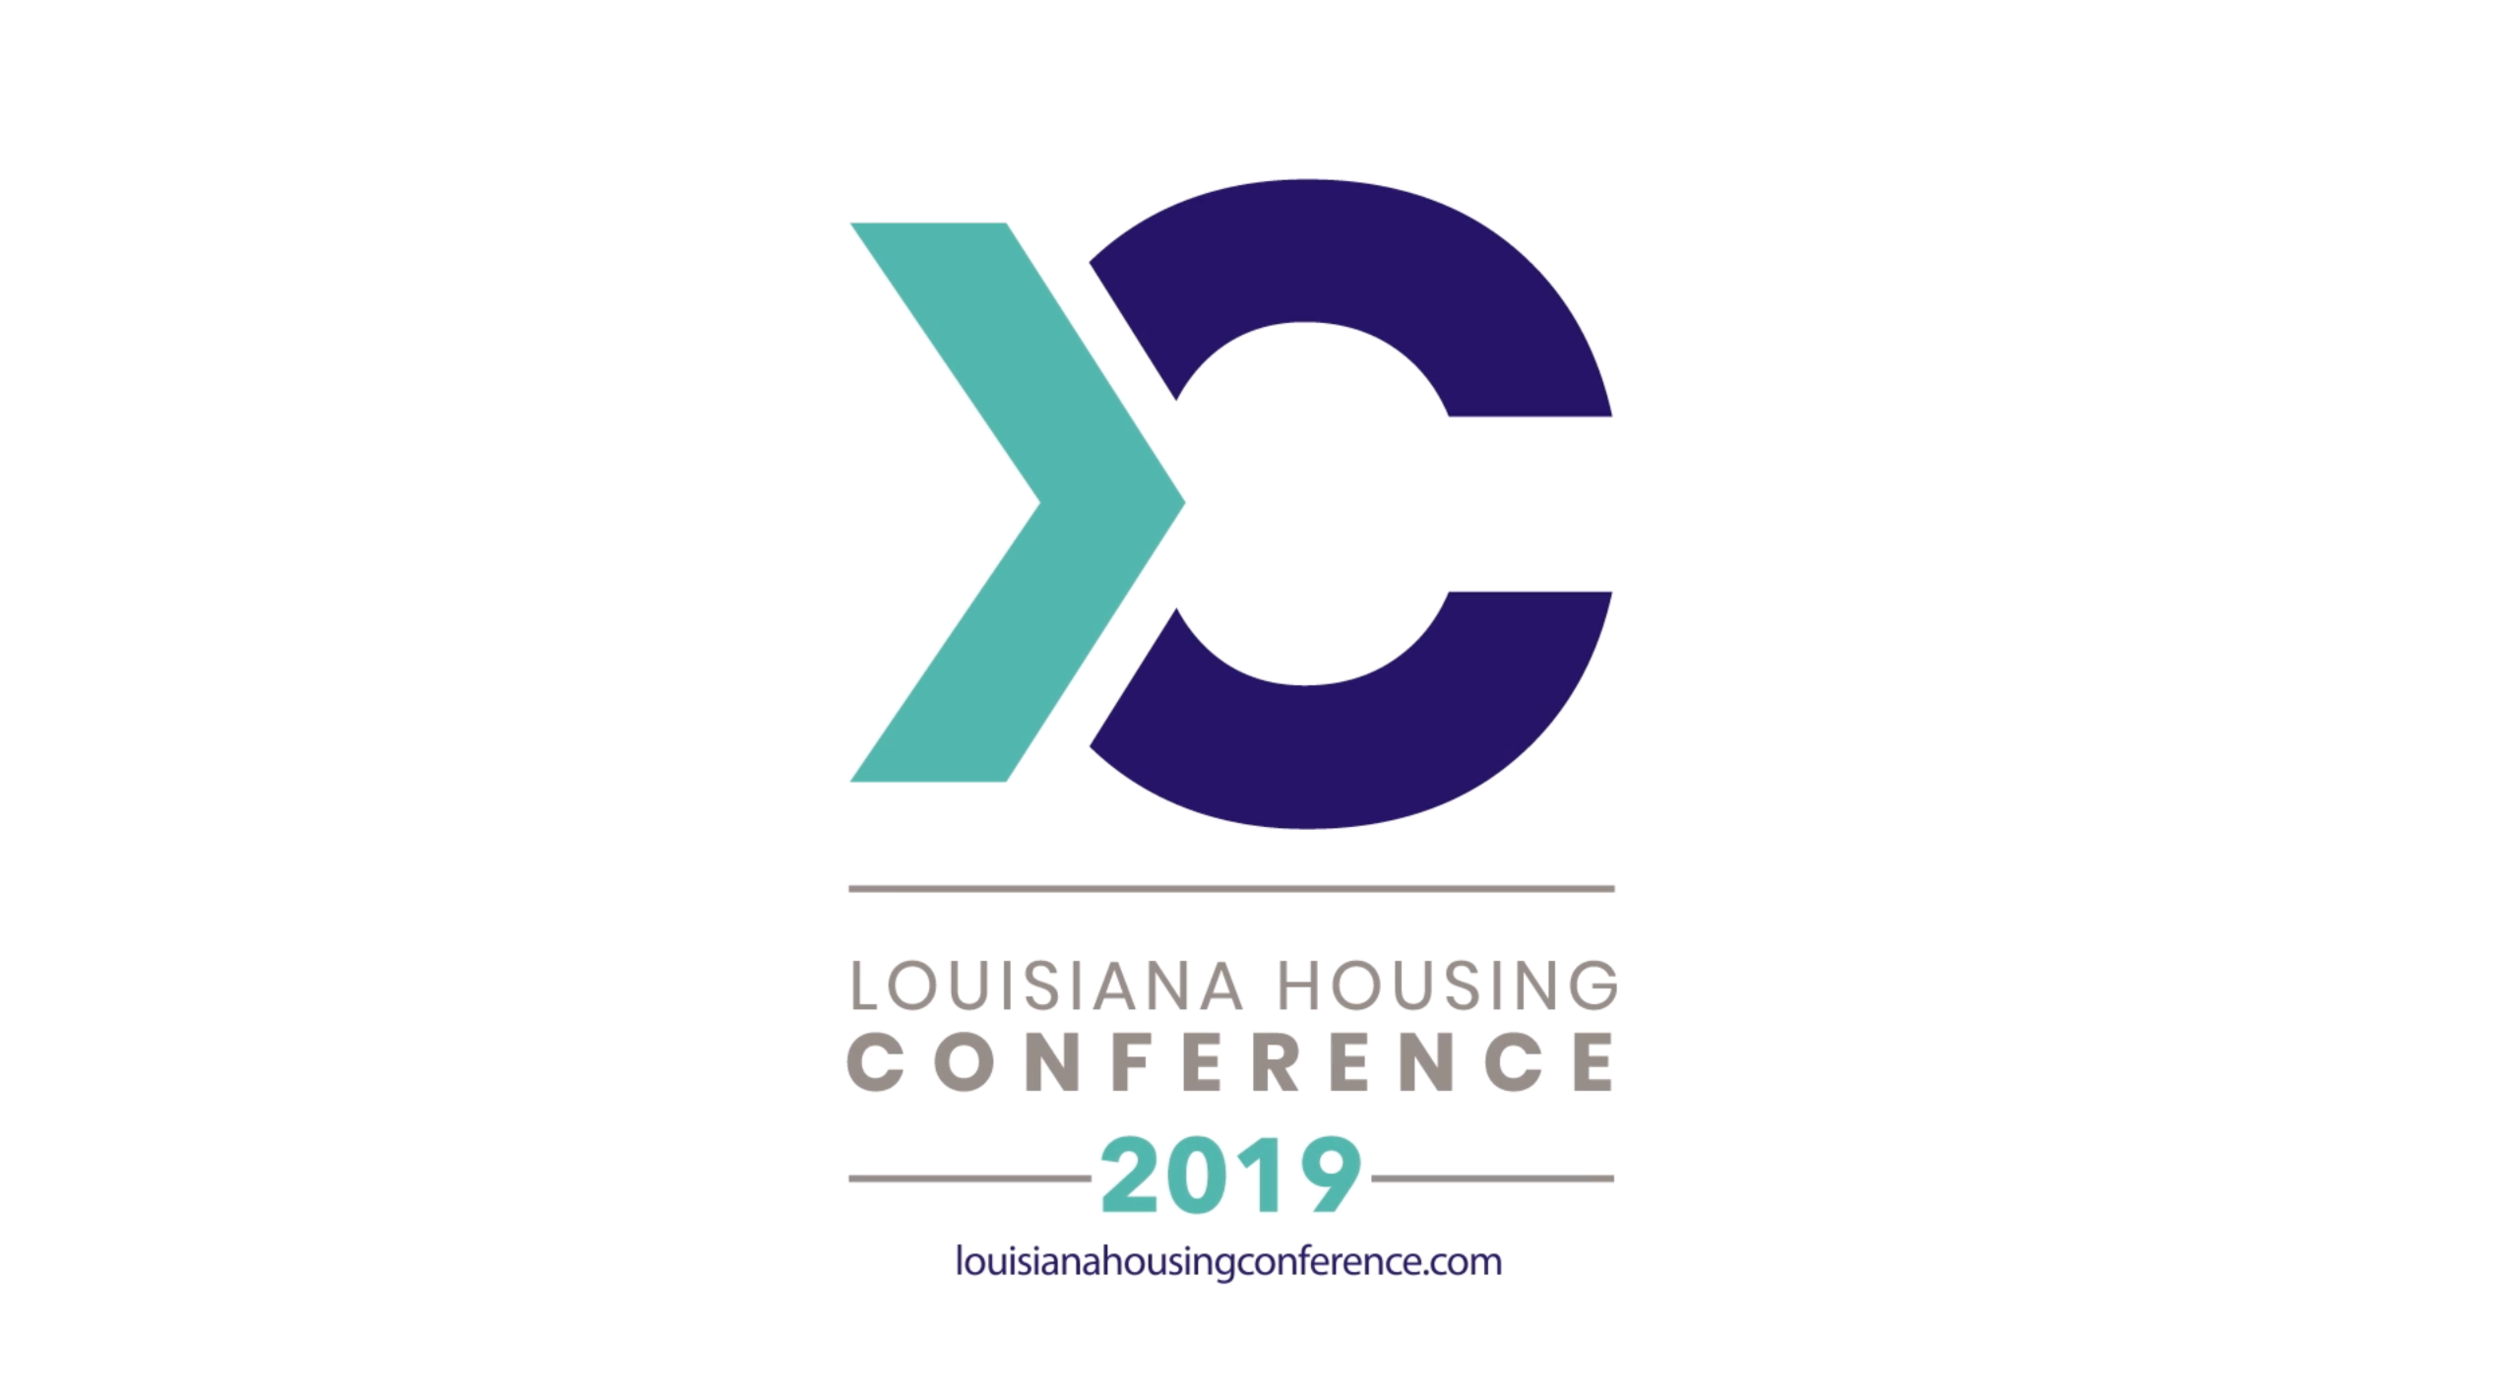 LHC: Housing Conference 2019